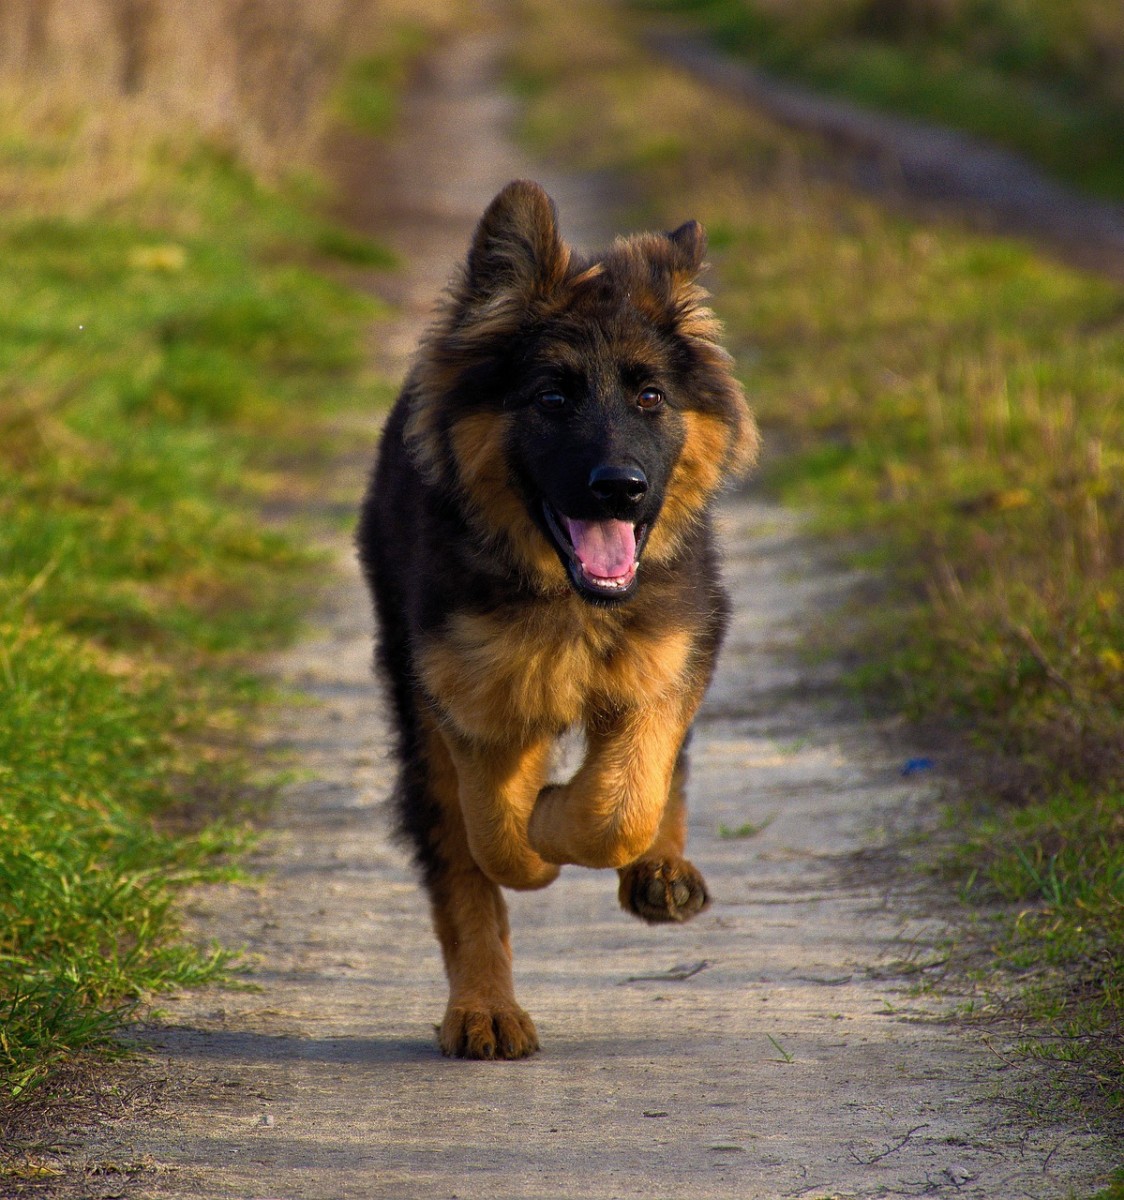 German Shepherds Are Active Dogs That Love to Run.